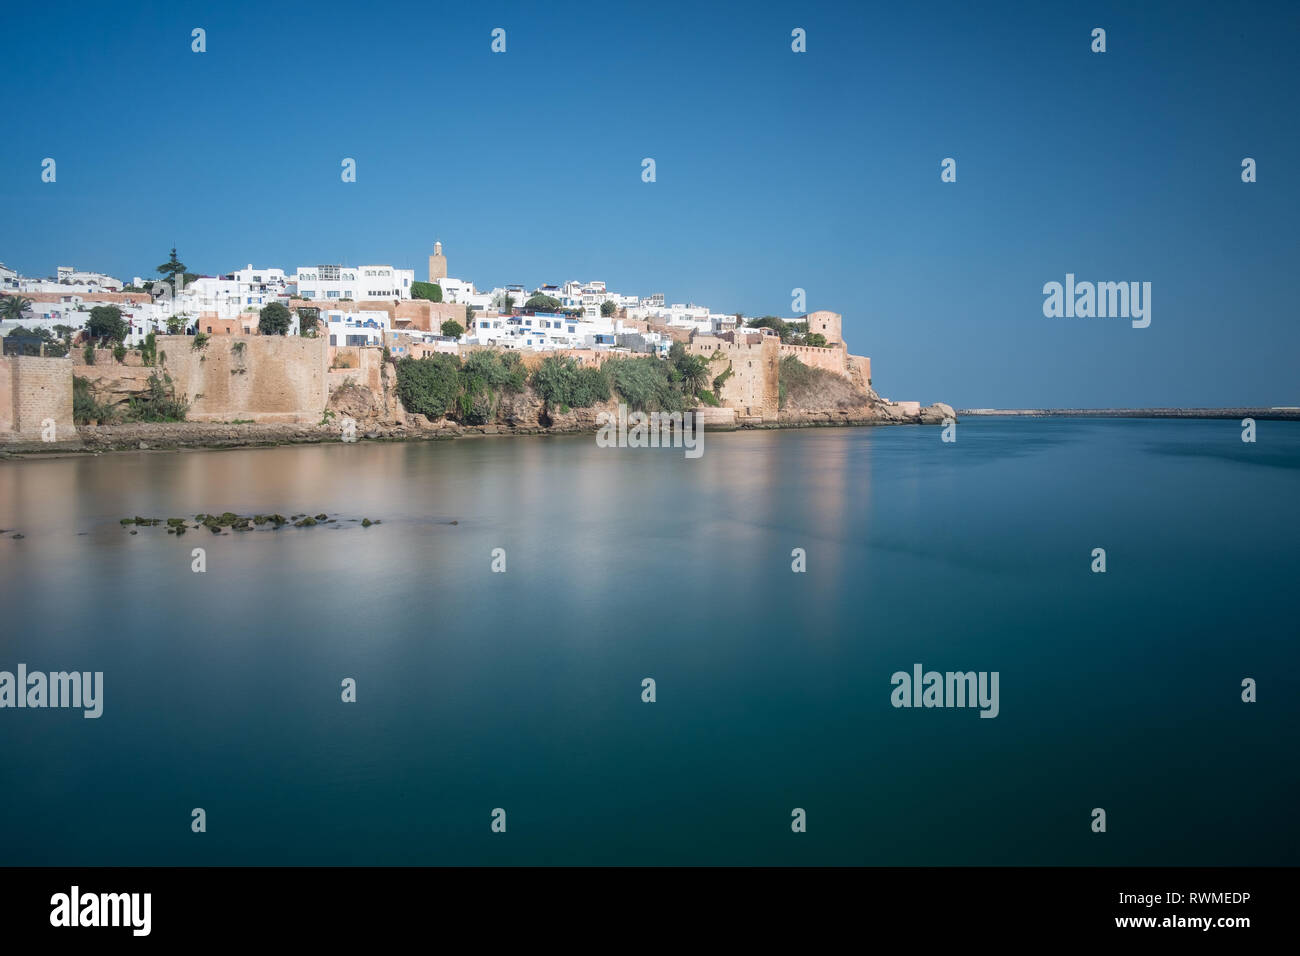 Colorful view of the Kasbah des Udayas with a long exposure. Rabat, Morocco Stock Photo